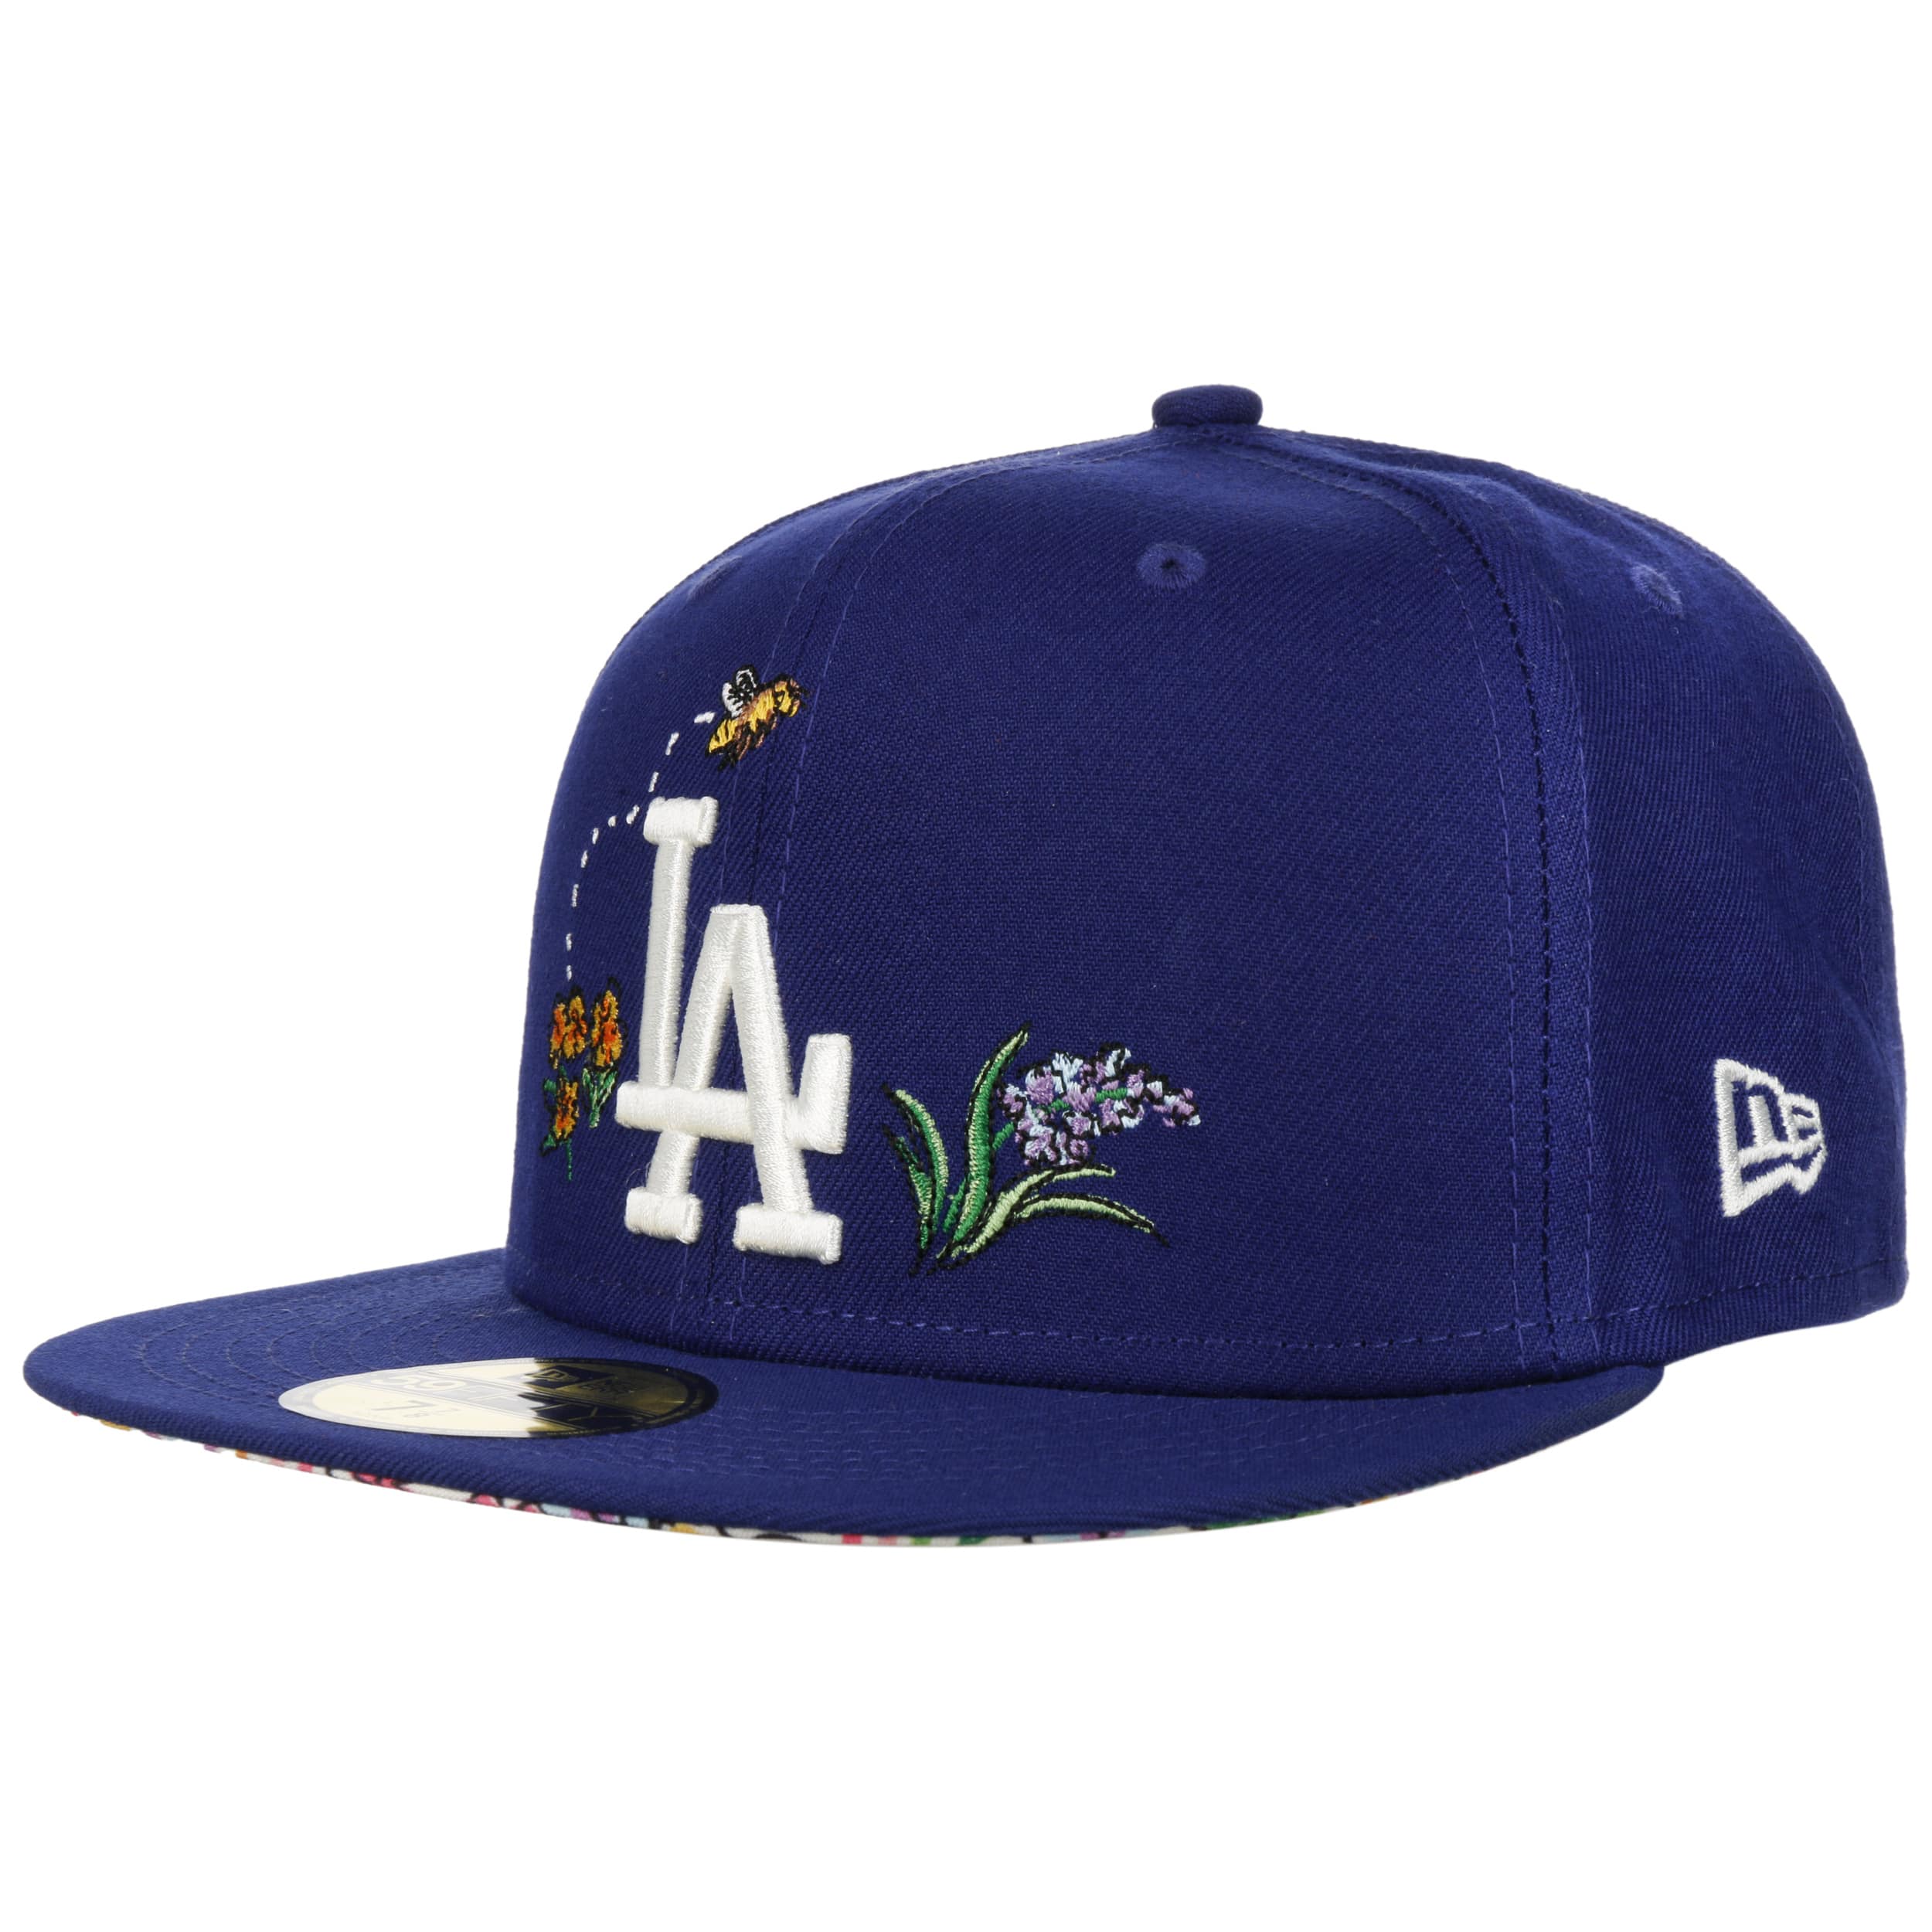 NEW ERA 59FIFTY MLB AUTHENTIC TAMPA BAY RAYS TEAM FITTED CAP  FAM